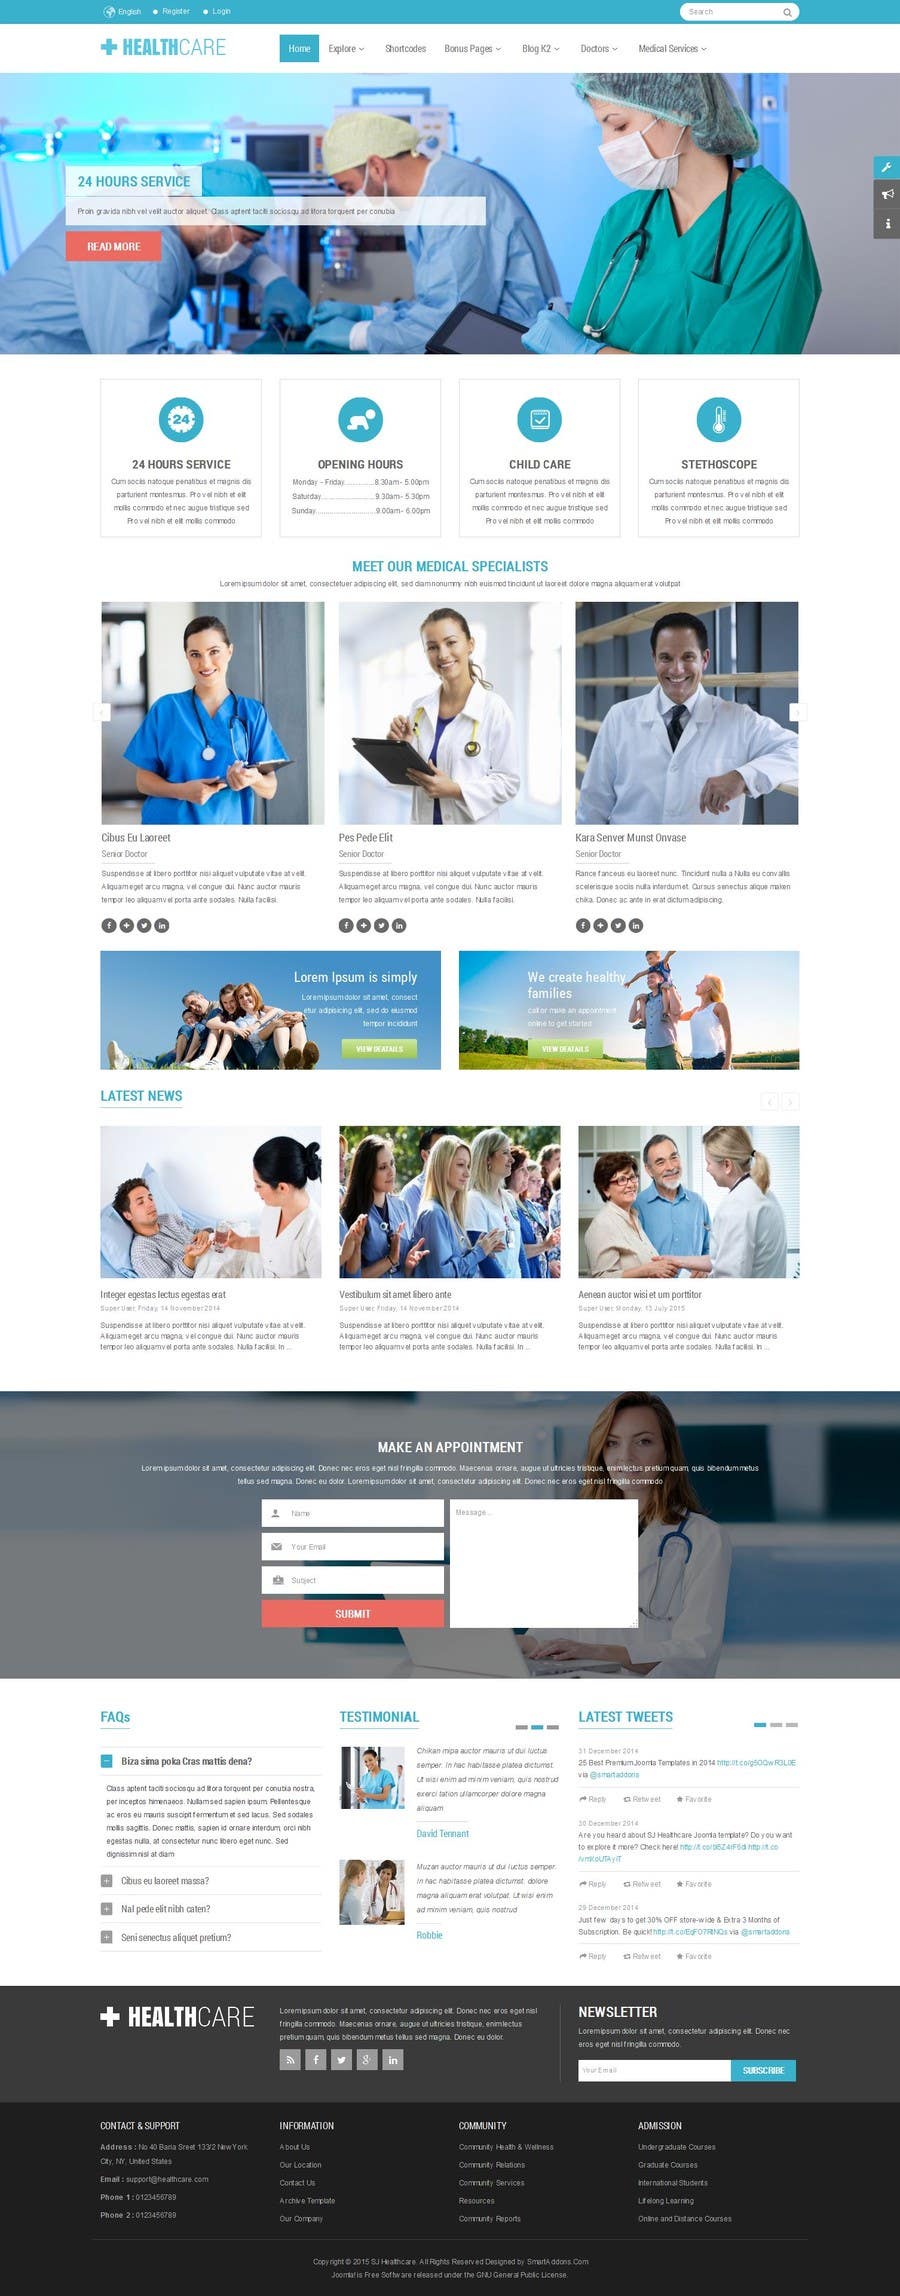 Contest Entry #1 for                                                 Design a Website Mockup for a Clinic
                                            